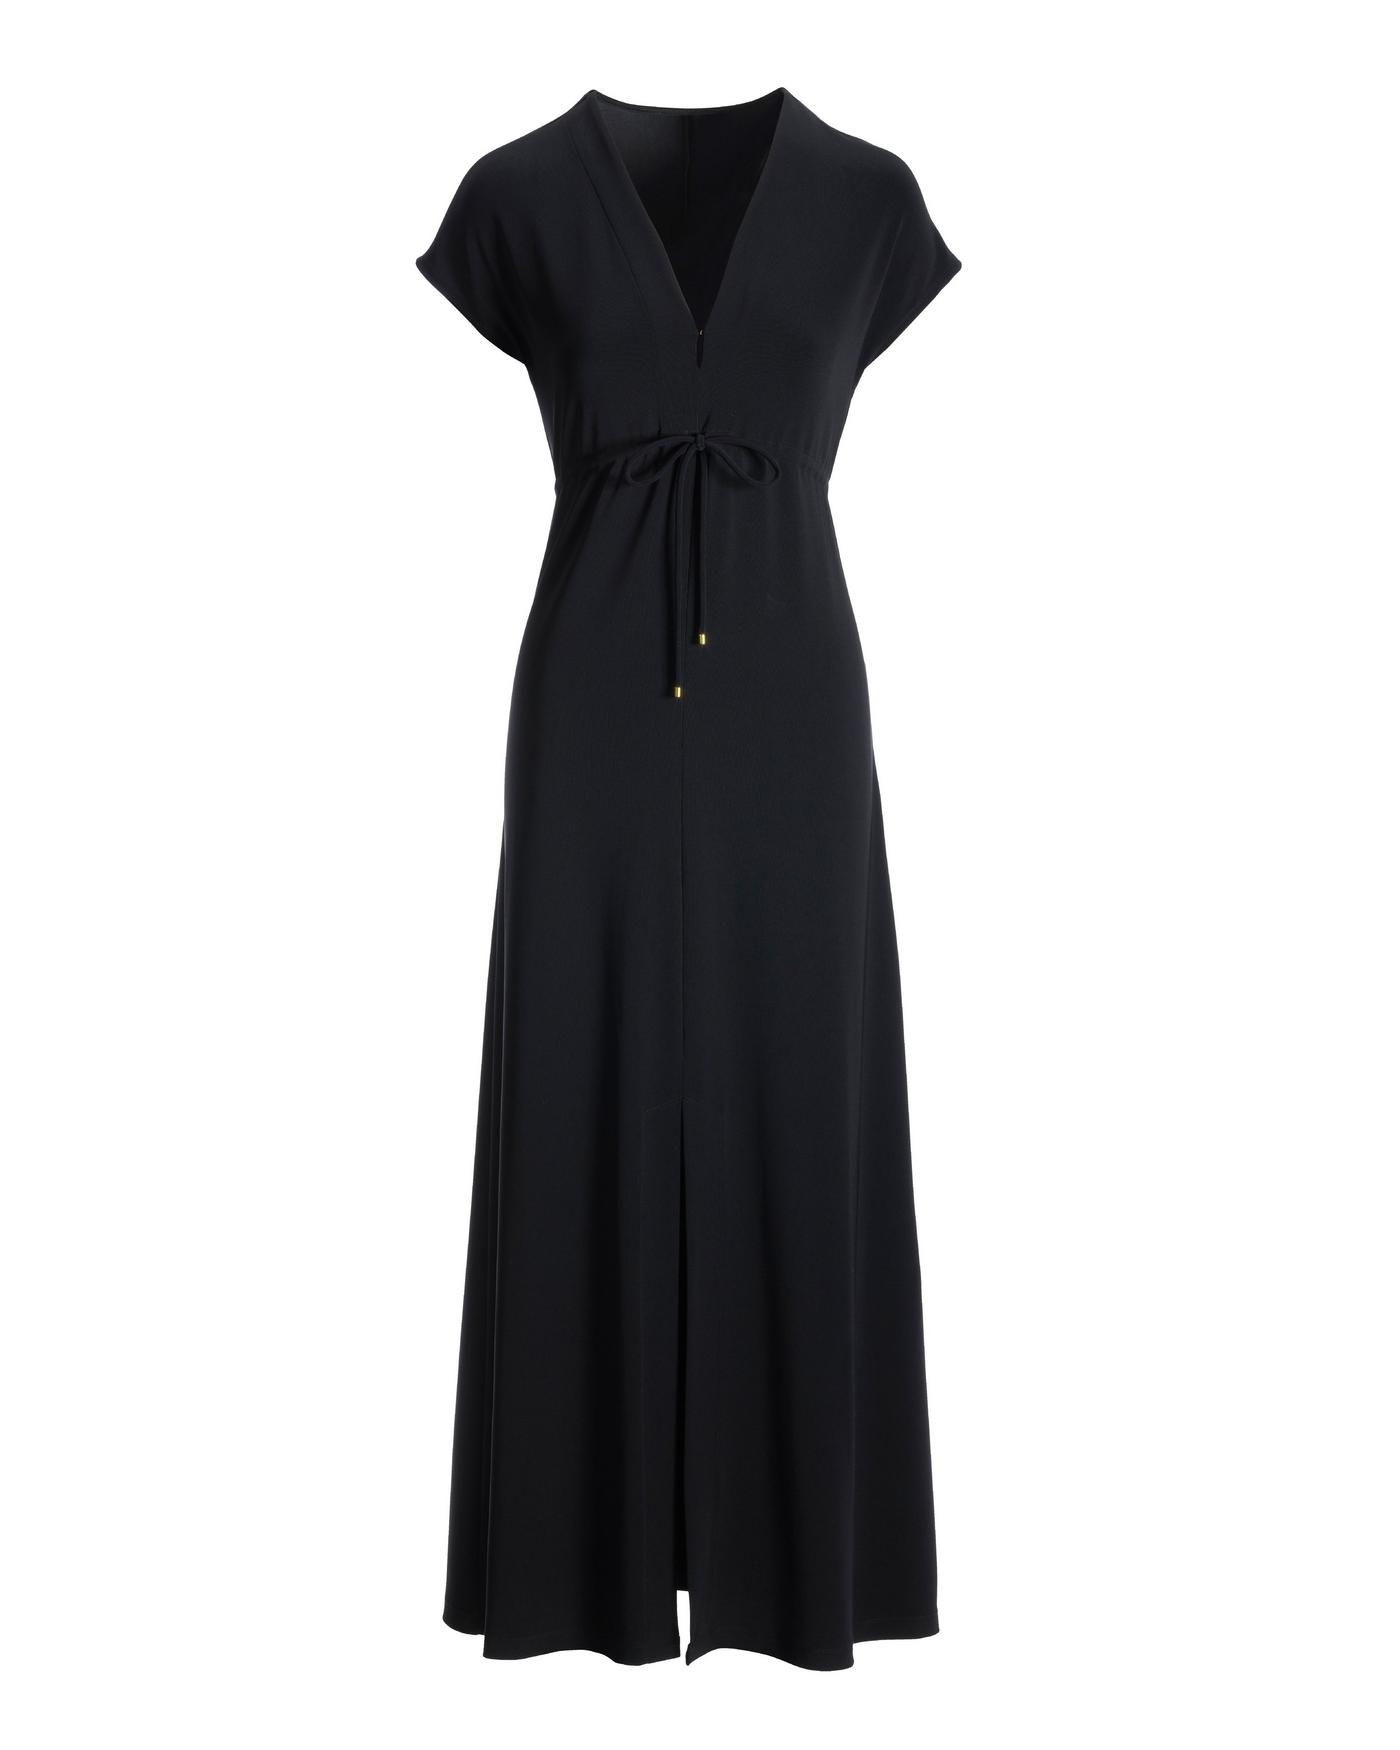 Shoppers Say This Hount Maxi Dress Is a 'Great Travel Dress